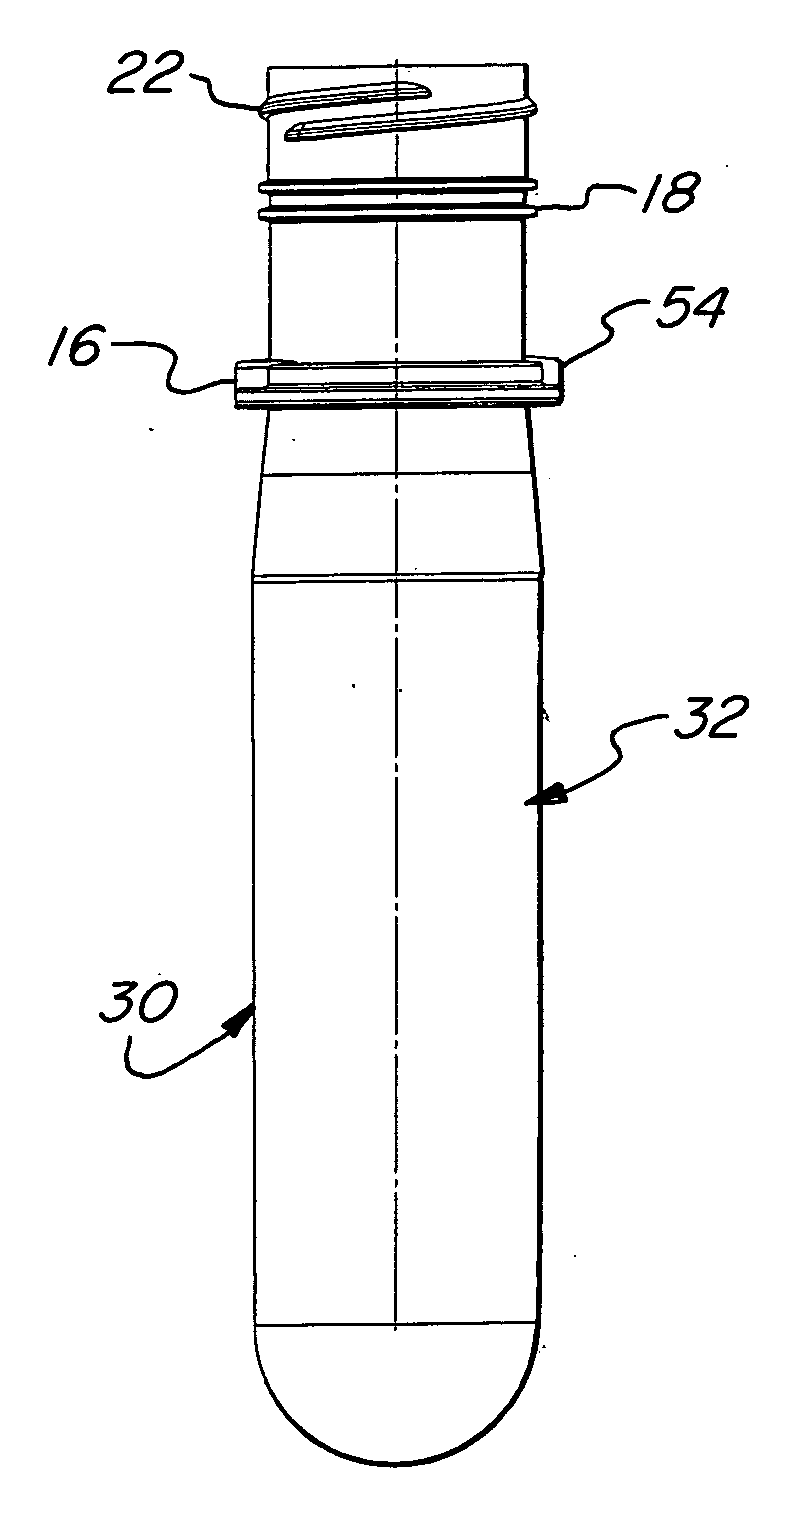 Bottle with extended neck finish and method of making same